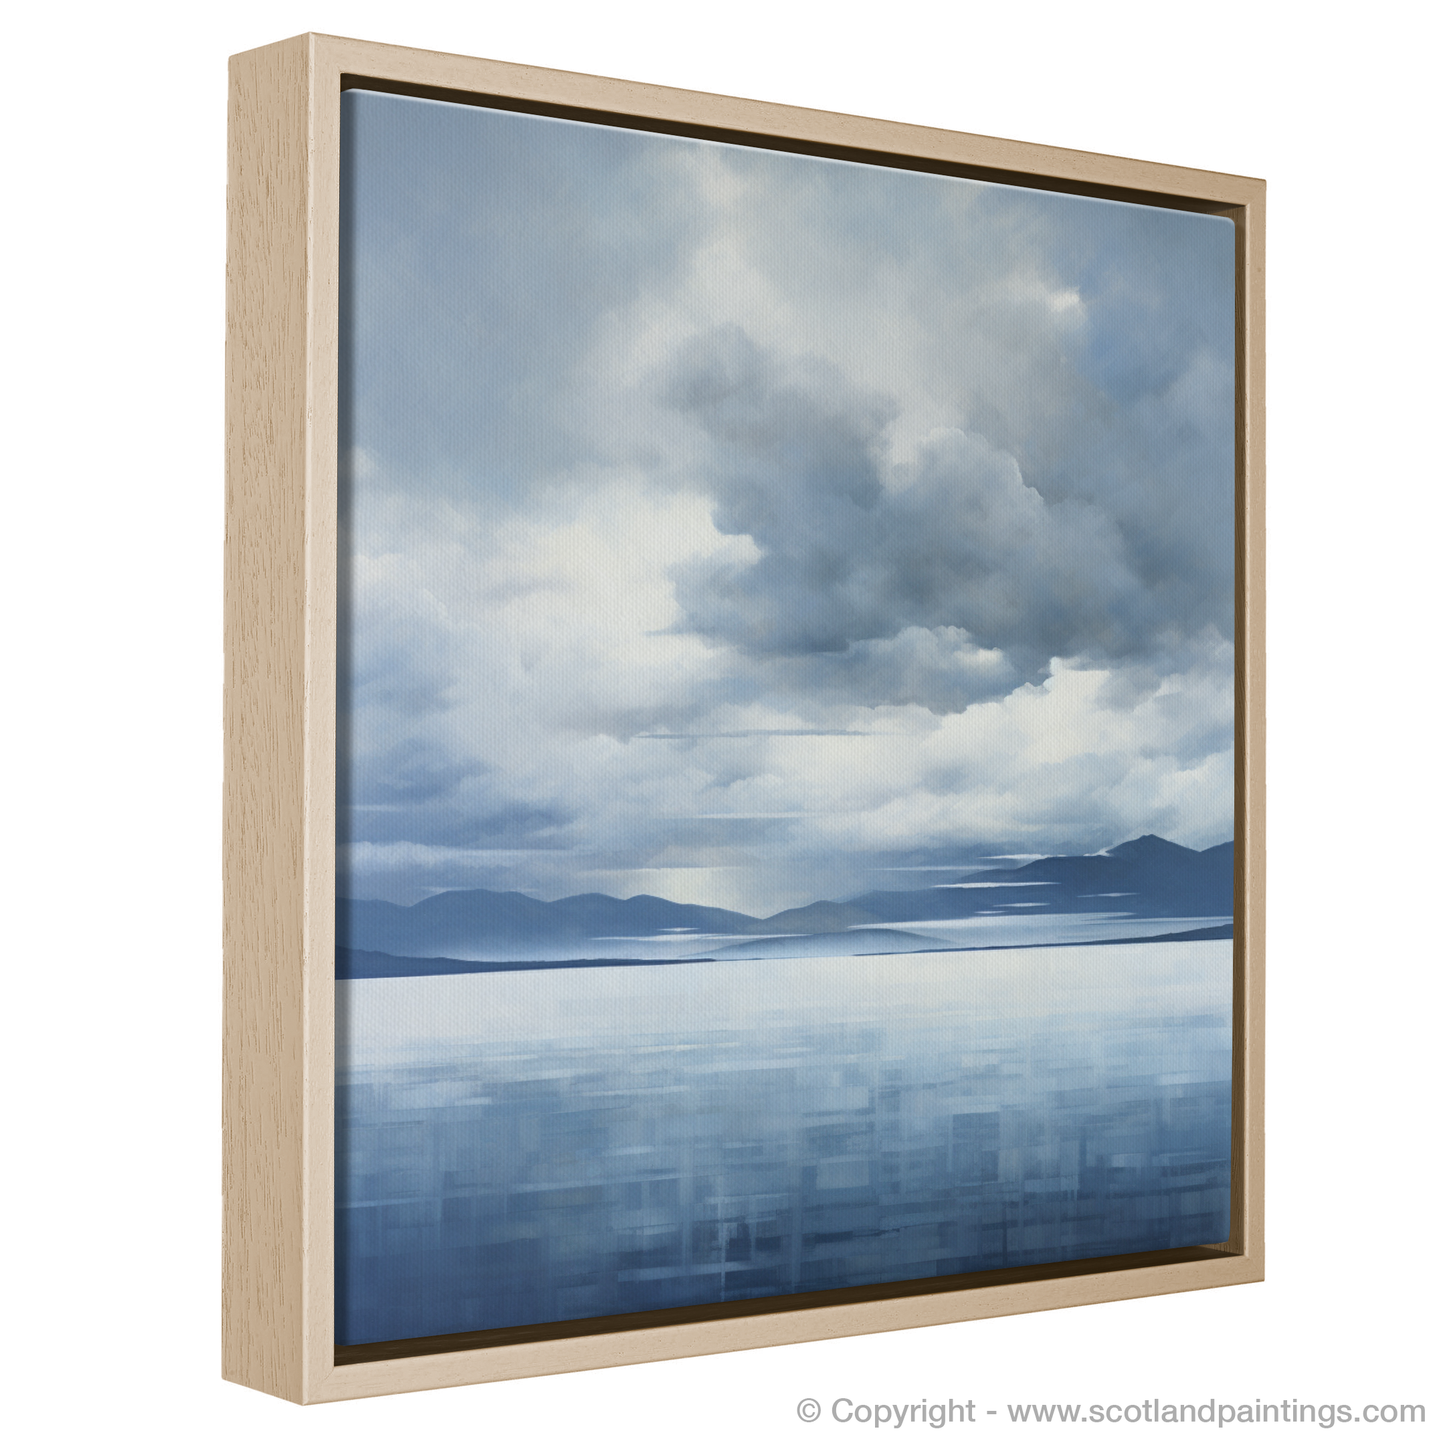 Painting and Art Print of Storm clouds above Loch Lomond entitled "Storm Clouds over Tranquil Loch Lomond".